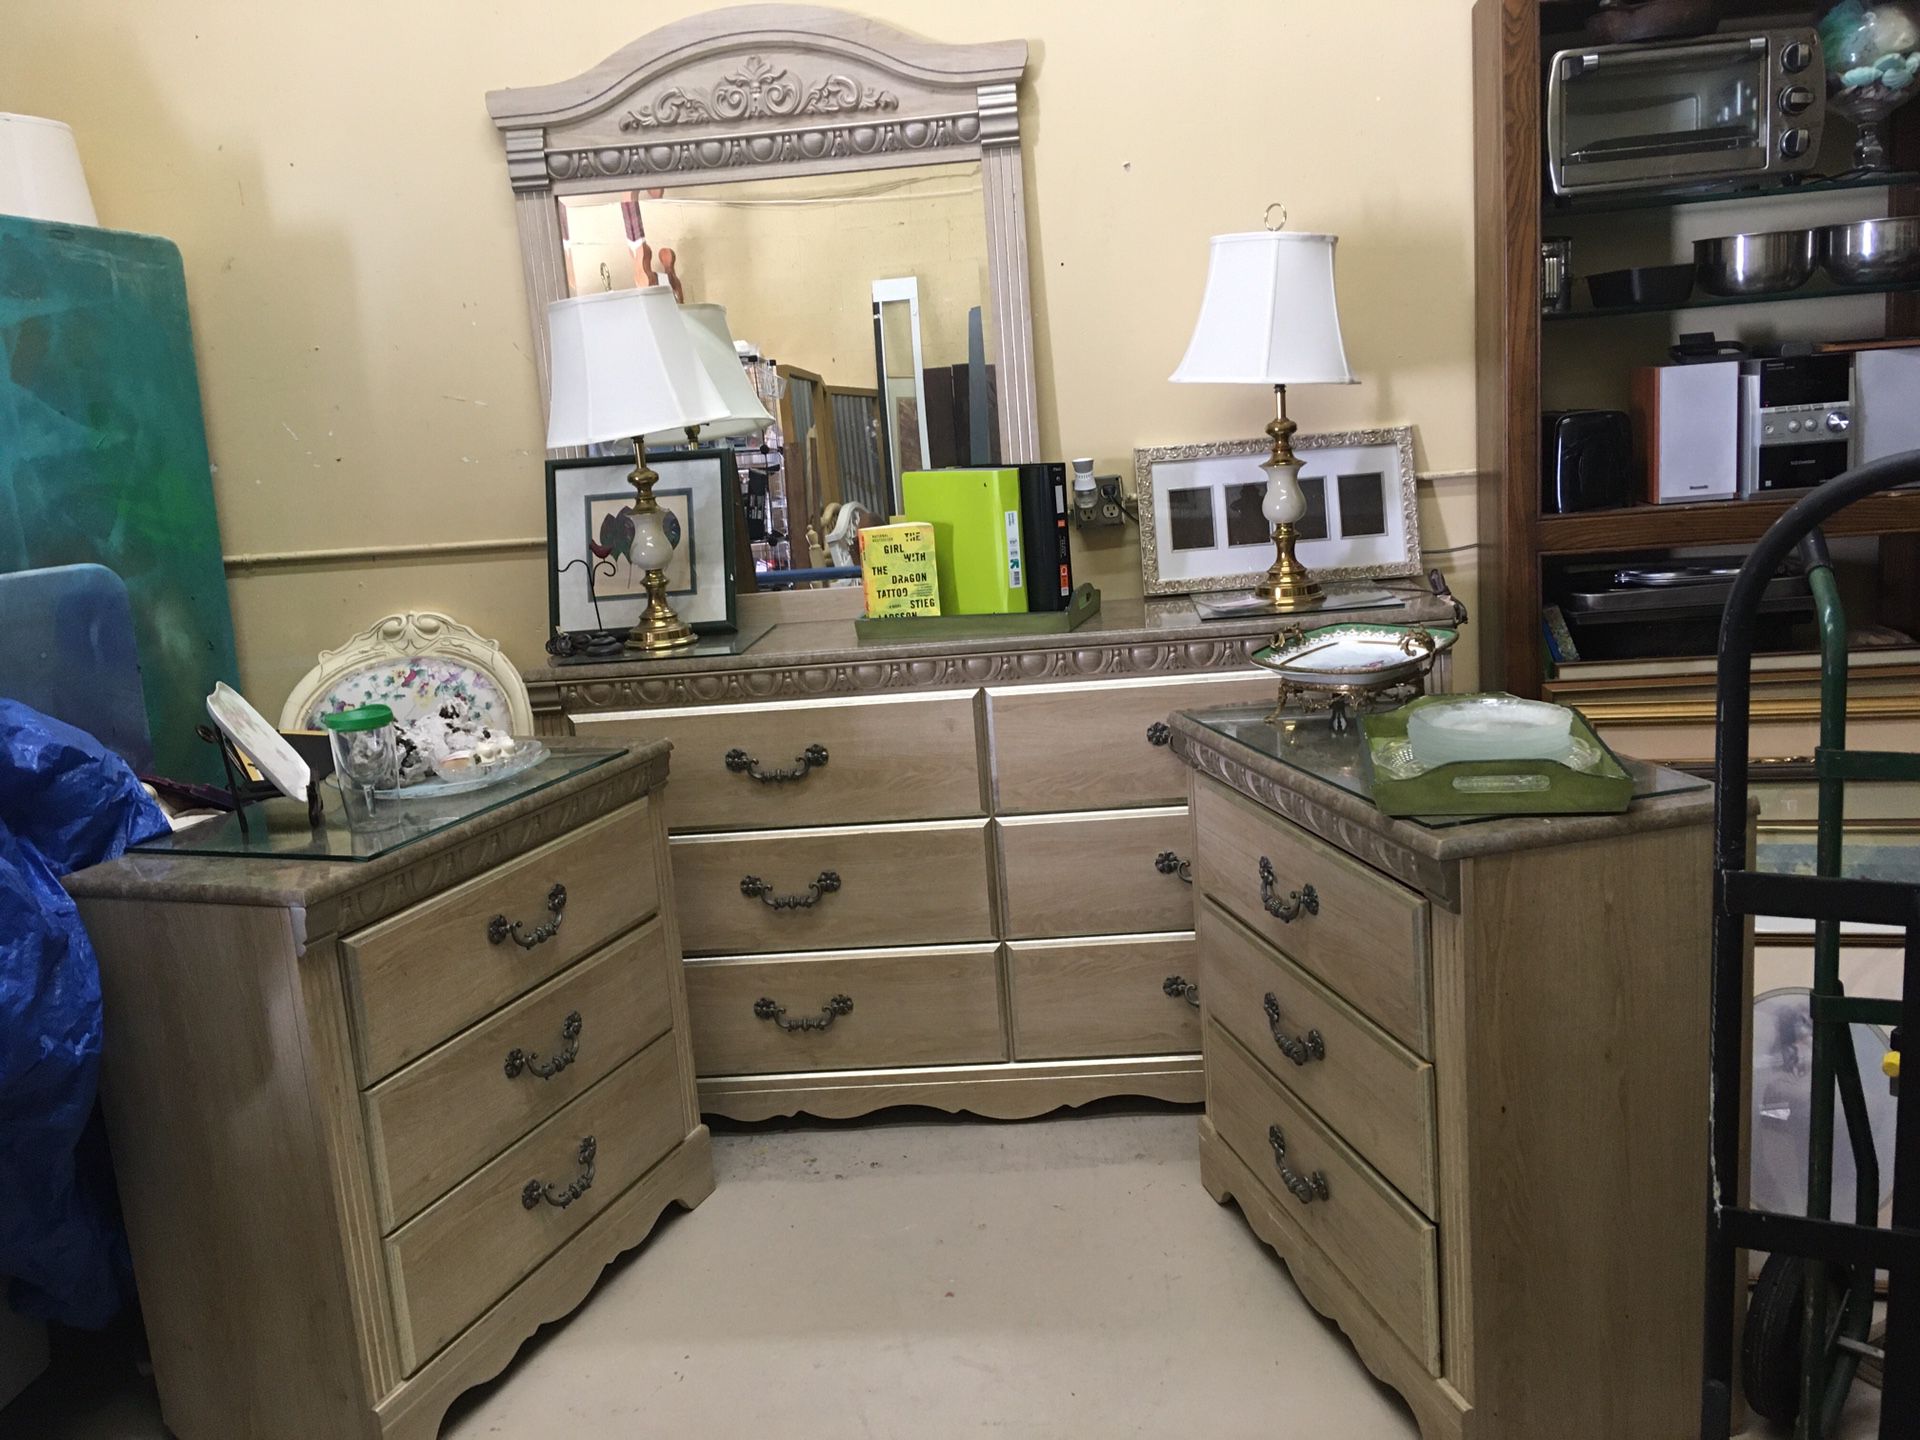 💥SUPER SALE!💥4PC BEDROOM SET DRESSER 2 NIGHTSTANDS & MIRROR *CAN DELIVER *zelle Venmo PayPal will hold! *If Posted still Avail!